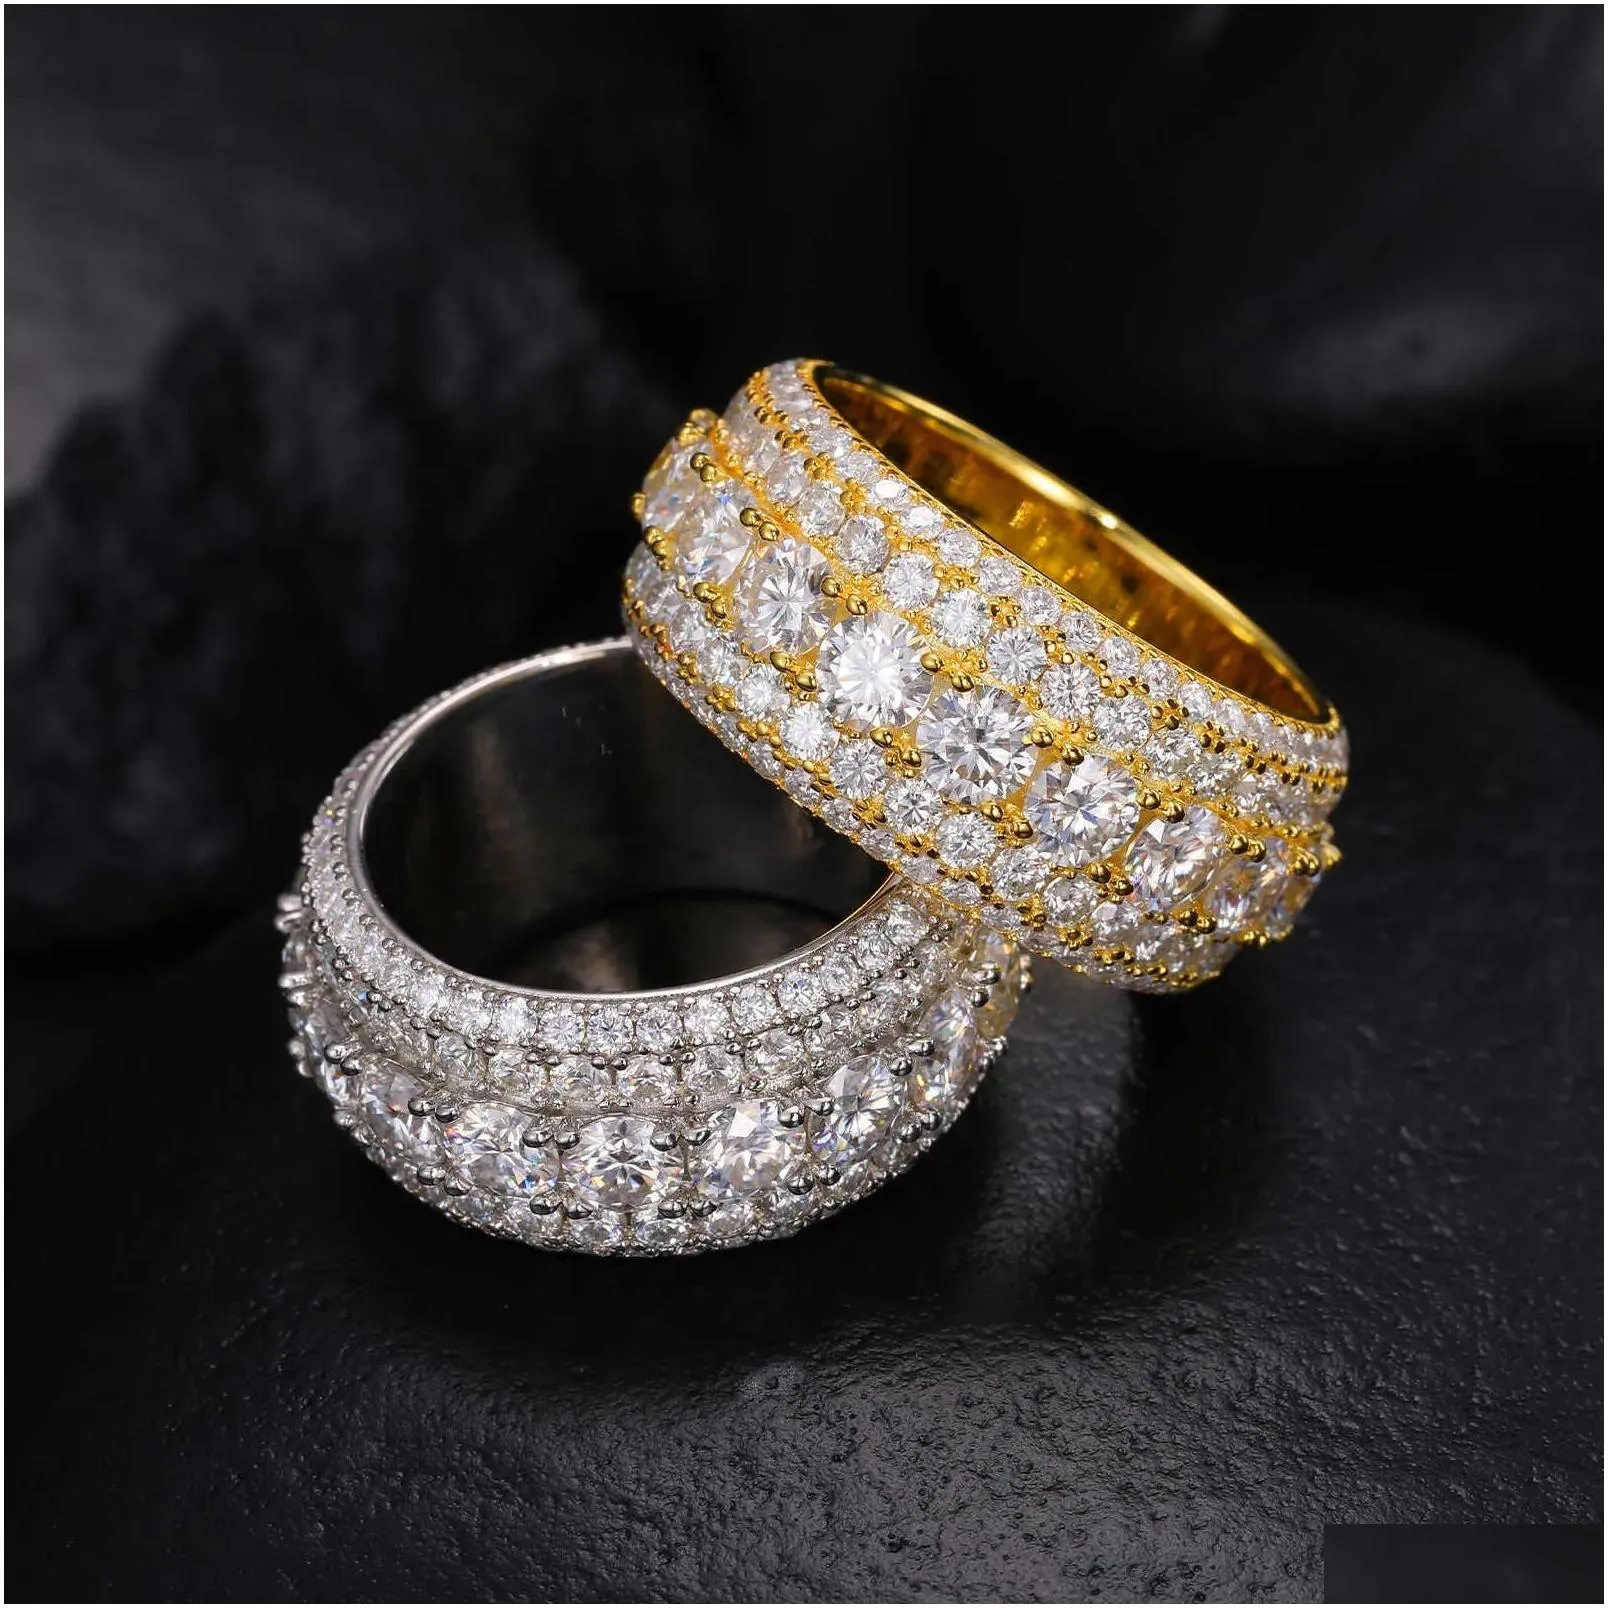 Band Rings Luxury 5 Rows Moissanite Ring Pass Diamond Tester 925 Sterling Sier Shiny Fashion Jewelry Men Gifts Nice Qq Drop Delivery Oti7H